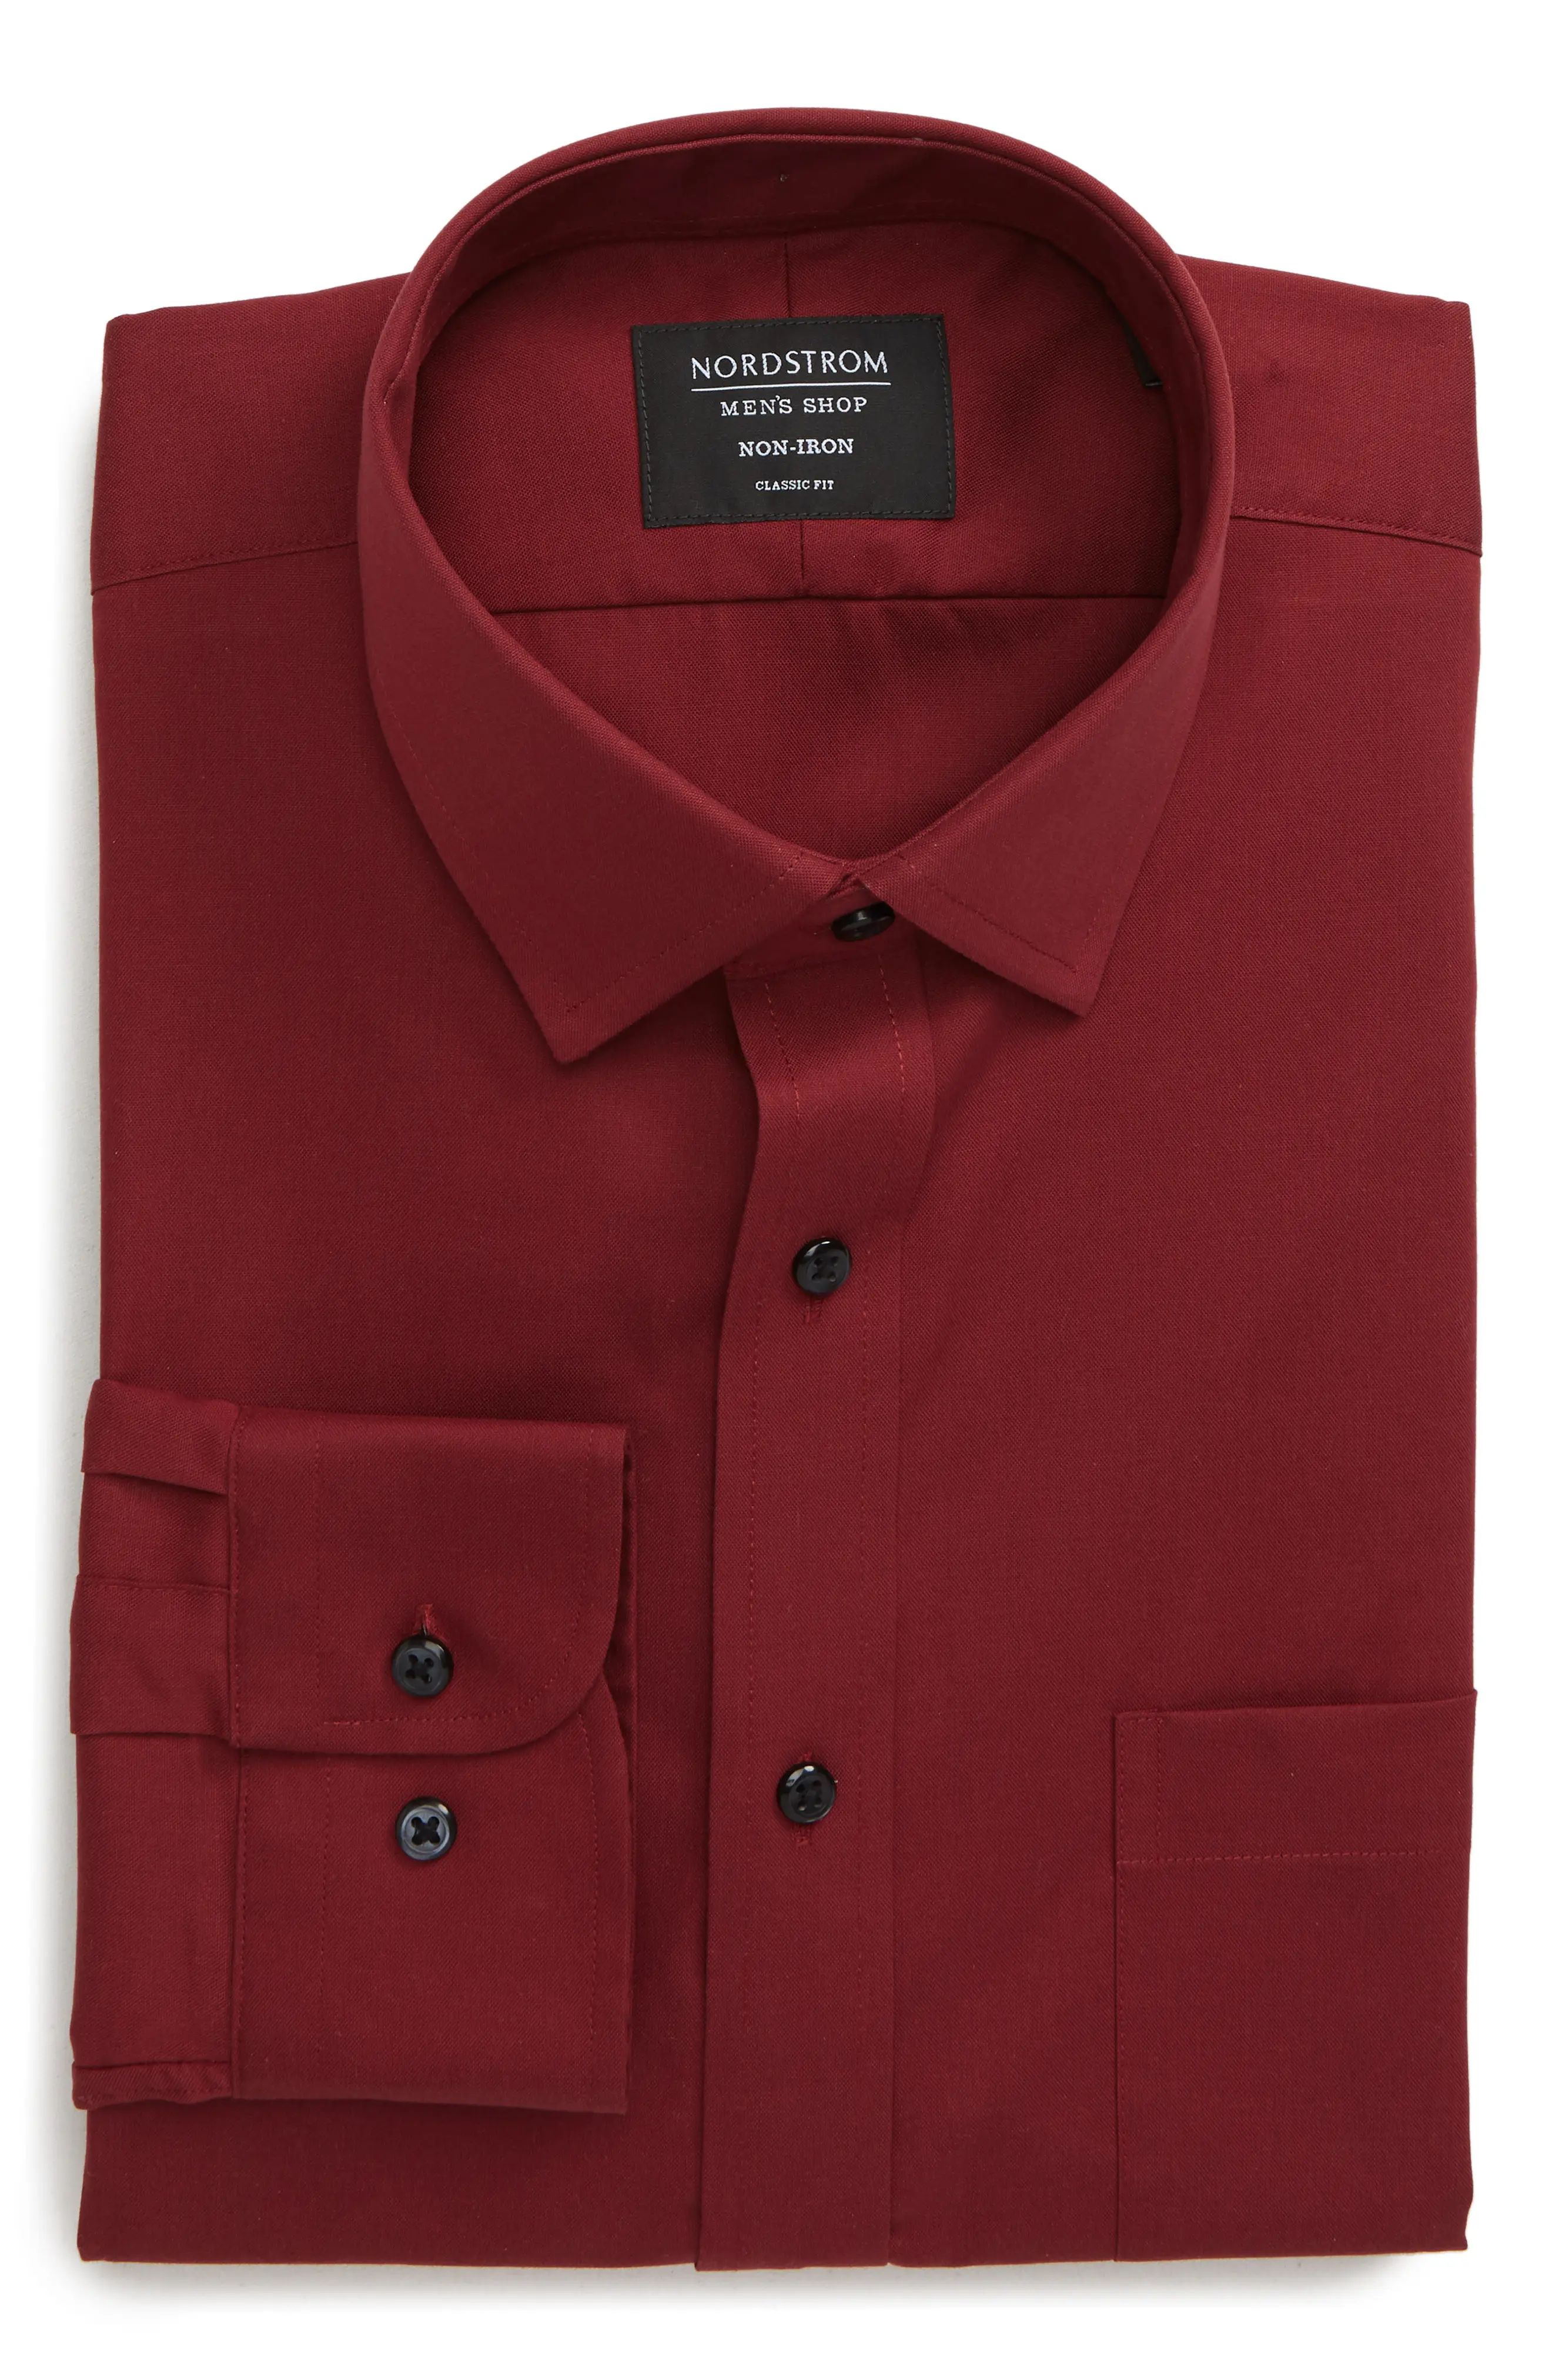 Men's Big & Tall Nordstrom Men's Shop Classic Fit Non-Iron Dress Shirt, Size 19 - 36/37 - Red | Nordstrom